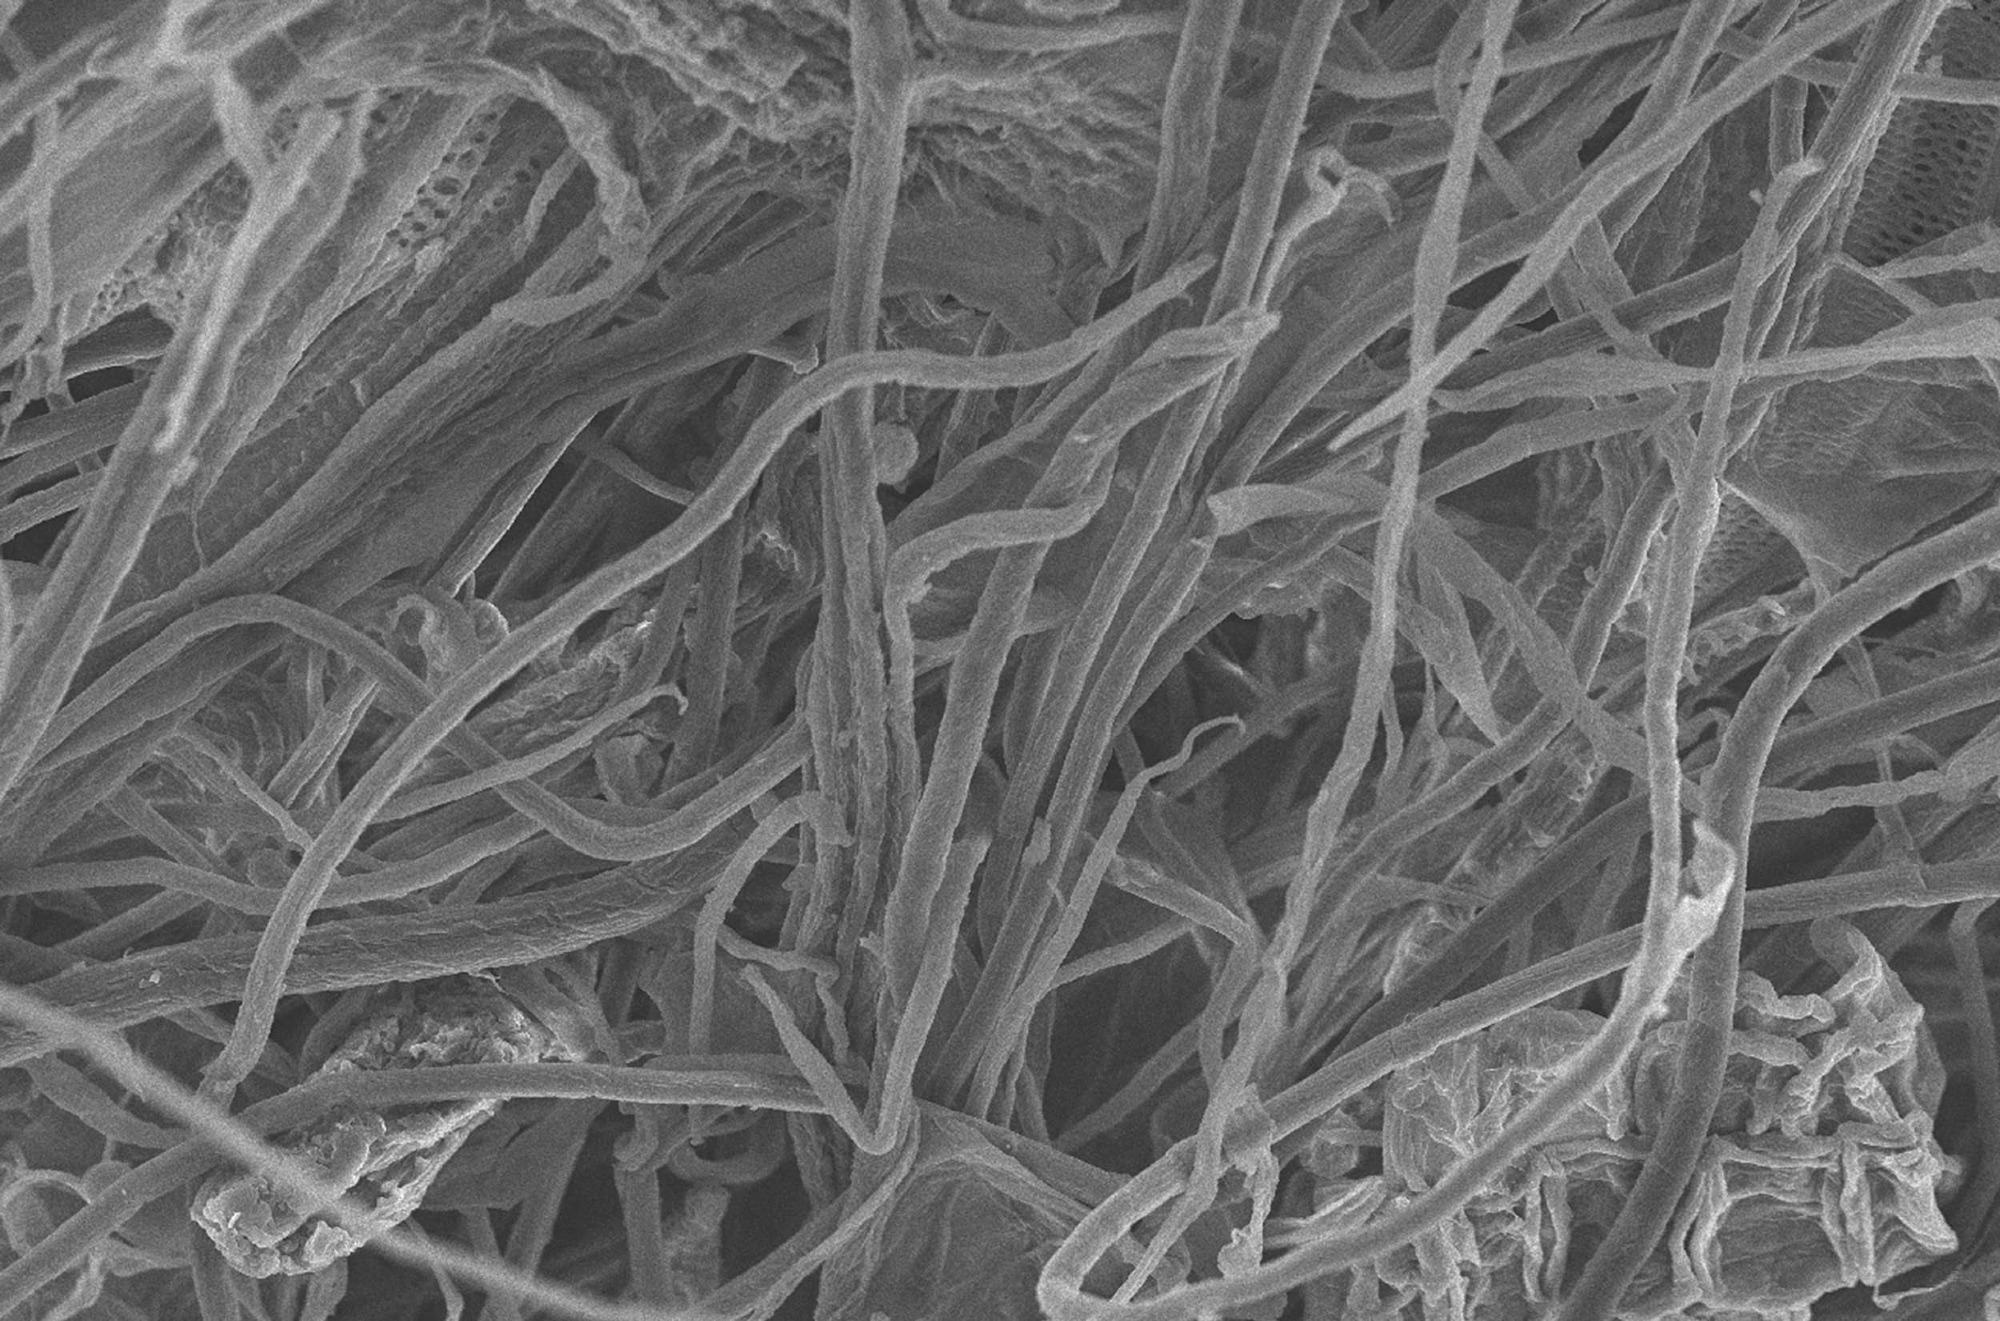 Nanocellulose Splendid Alternative for Sustainable Water Purification